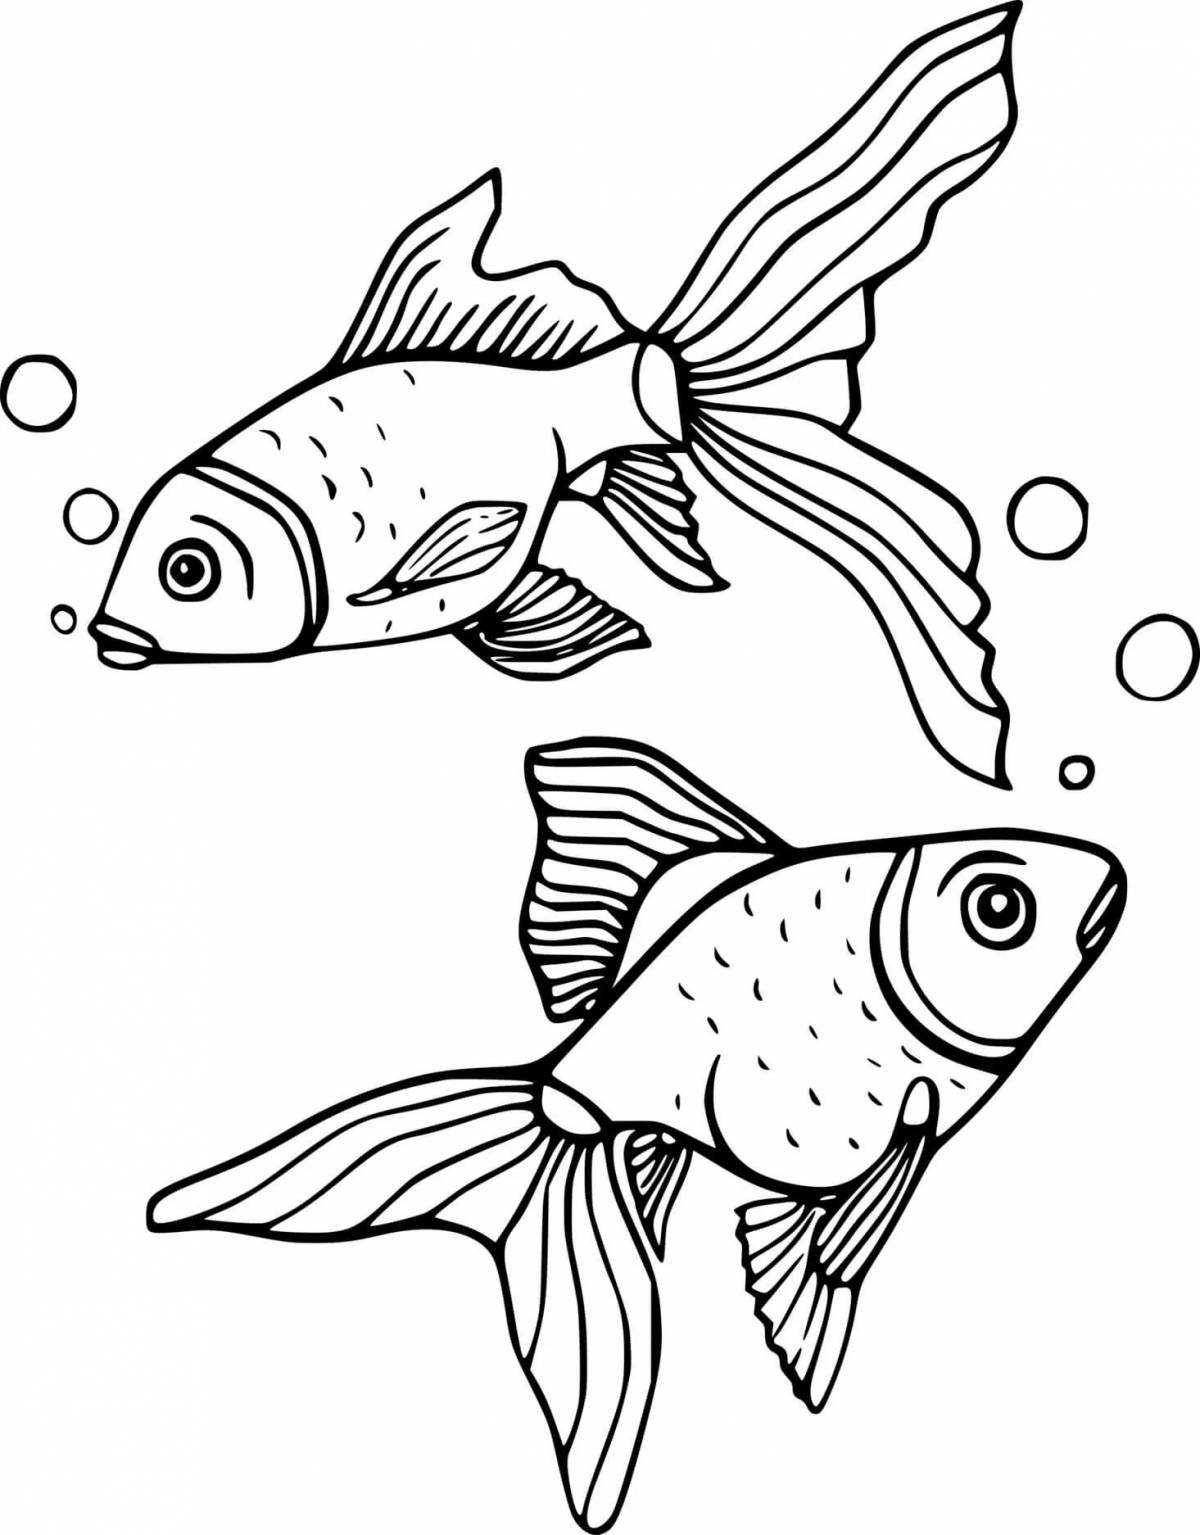 Intricate fish coloring page